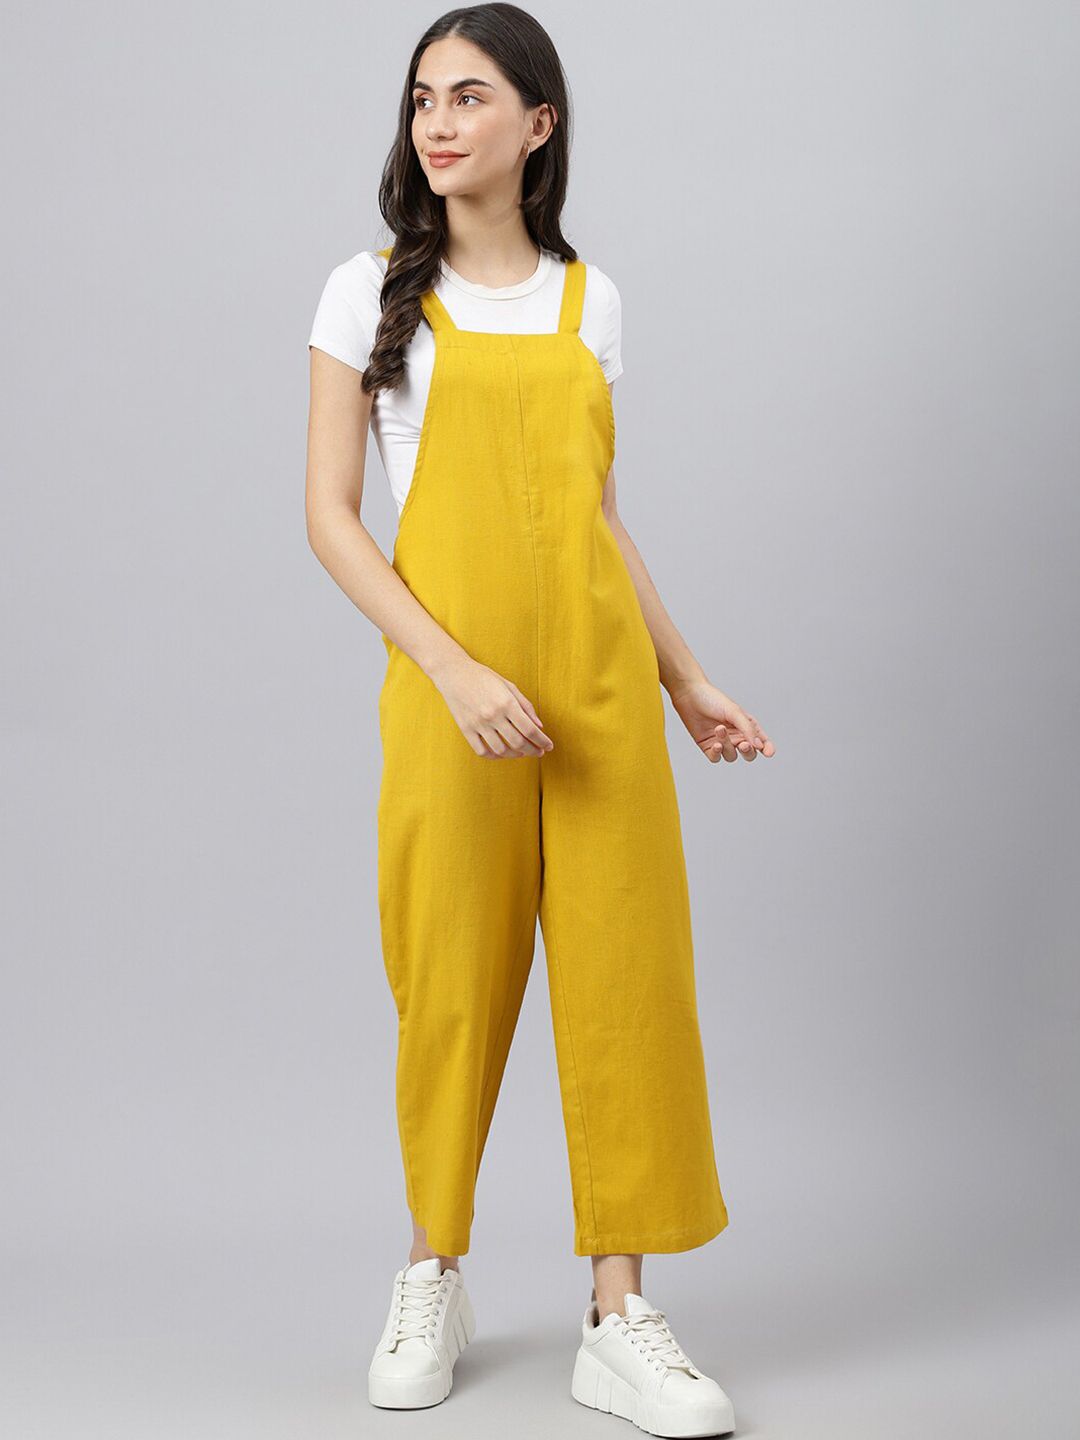 DEEBACO Yellow & White Culotte Jumpsuit Price in India